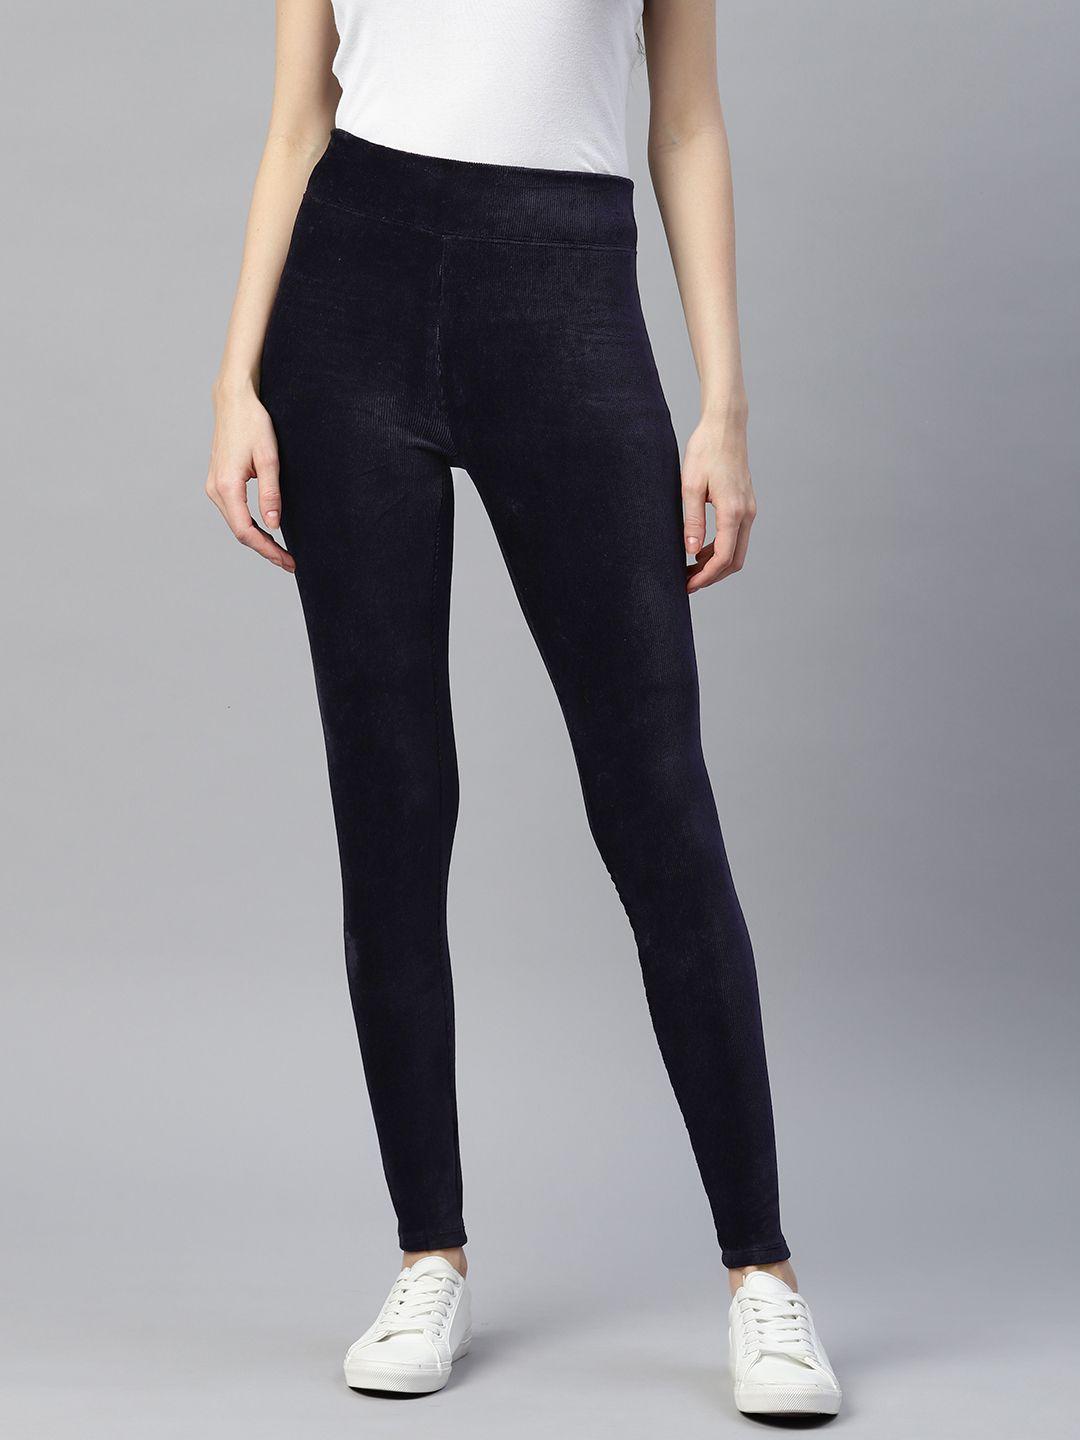 marks & spencer women solid corduroy knitted jeggings